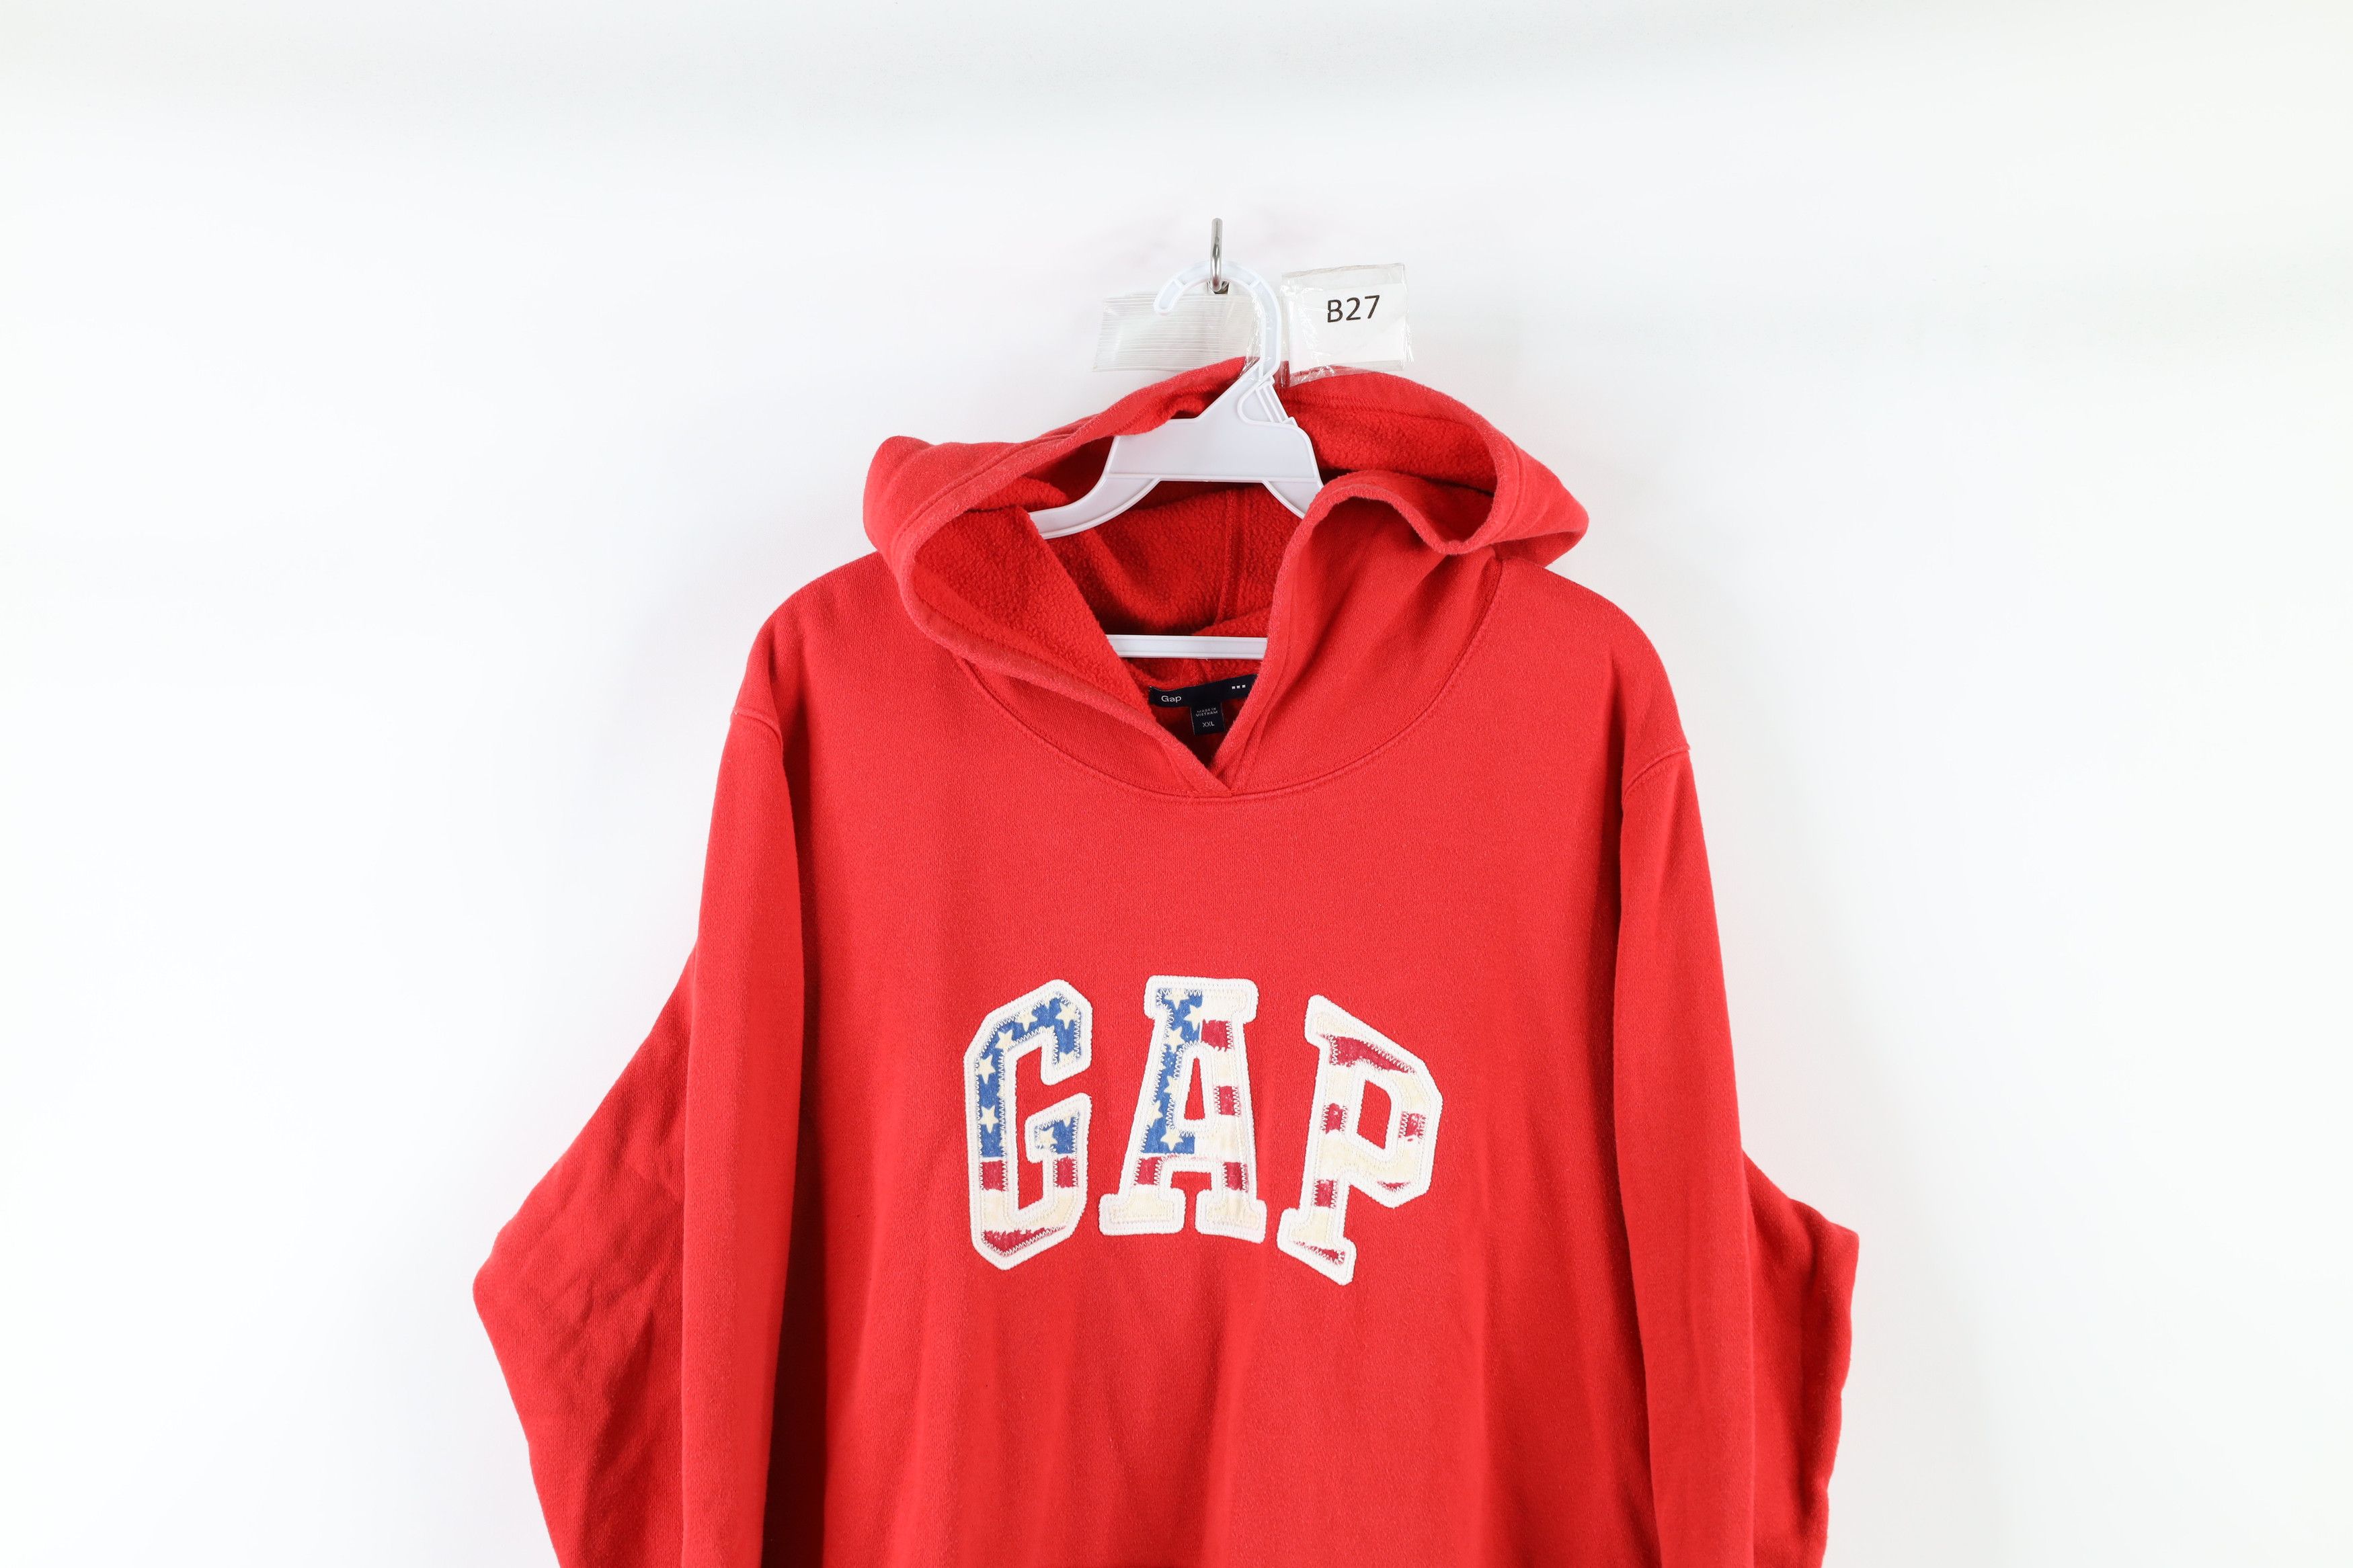 Vintage Vintage Gap Spell Out Block Letter Hoodie Sweatshirt Red Size US XXL / EU 58 / 5 - 2 Preview